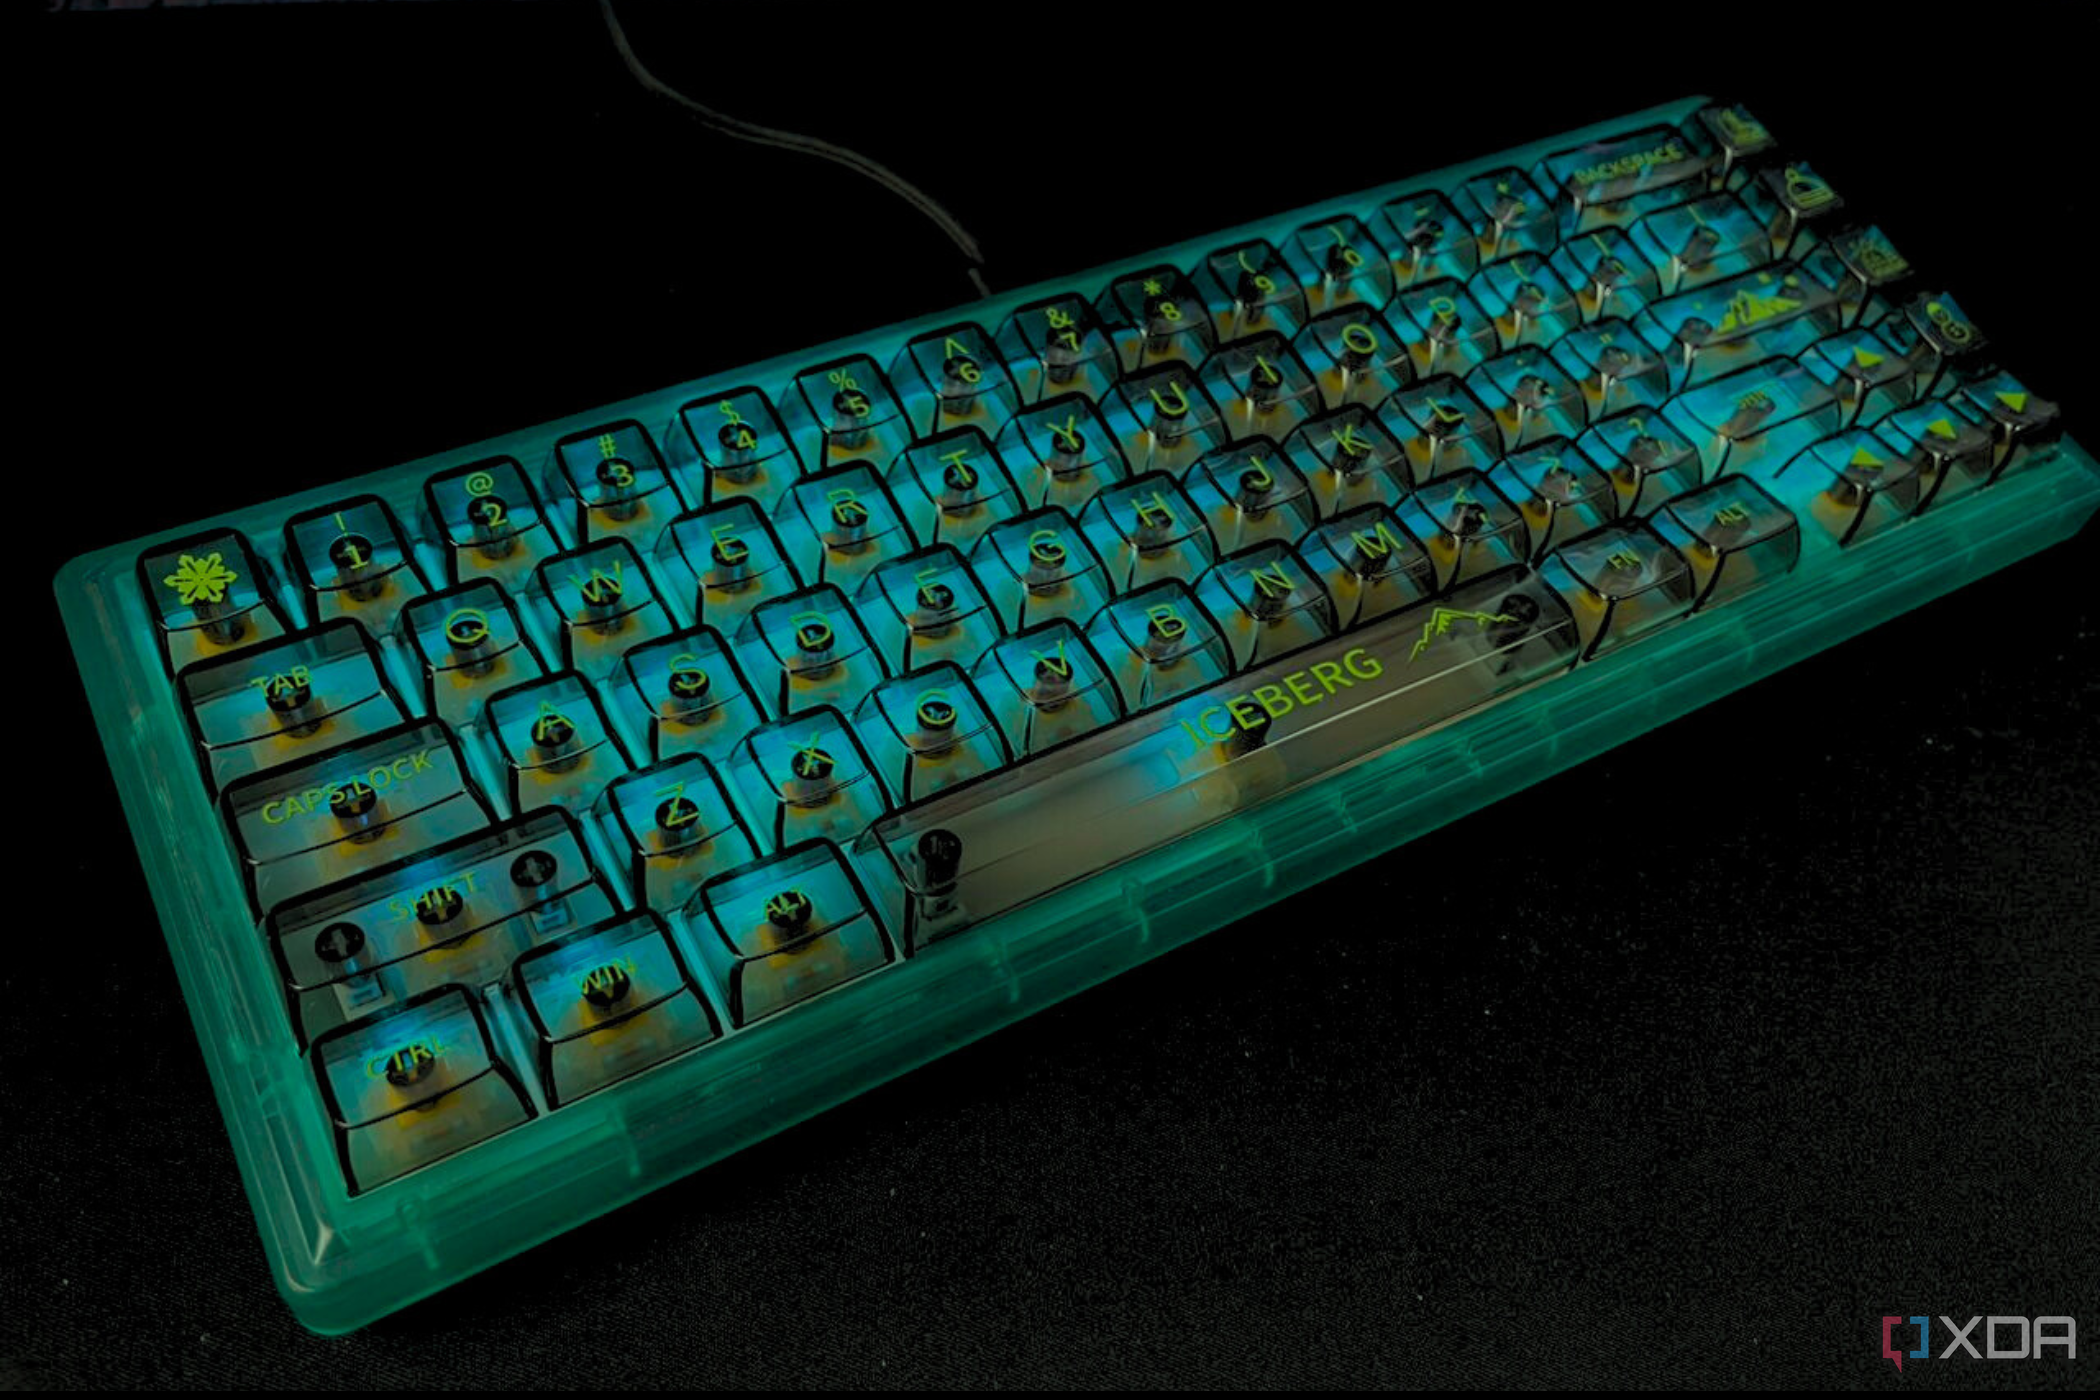 Image of a green CIY GAS67 cutom built keyboard with 